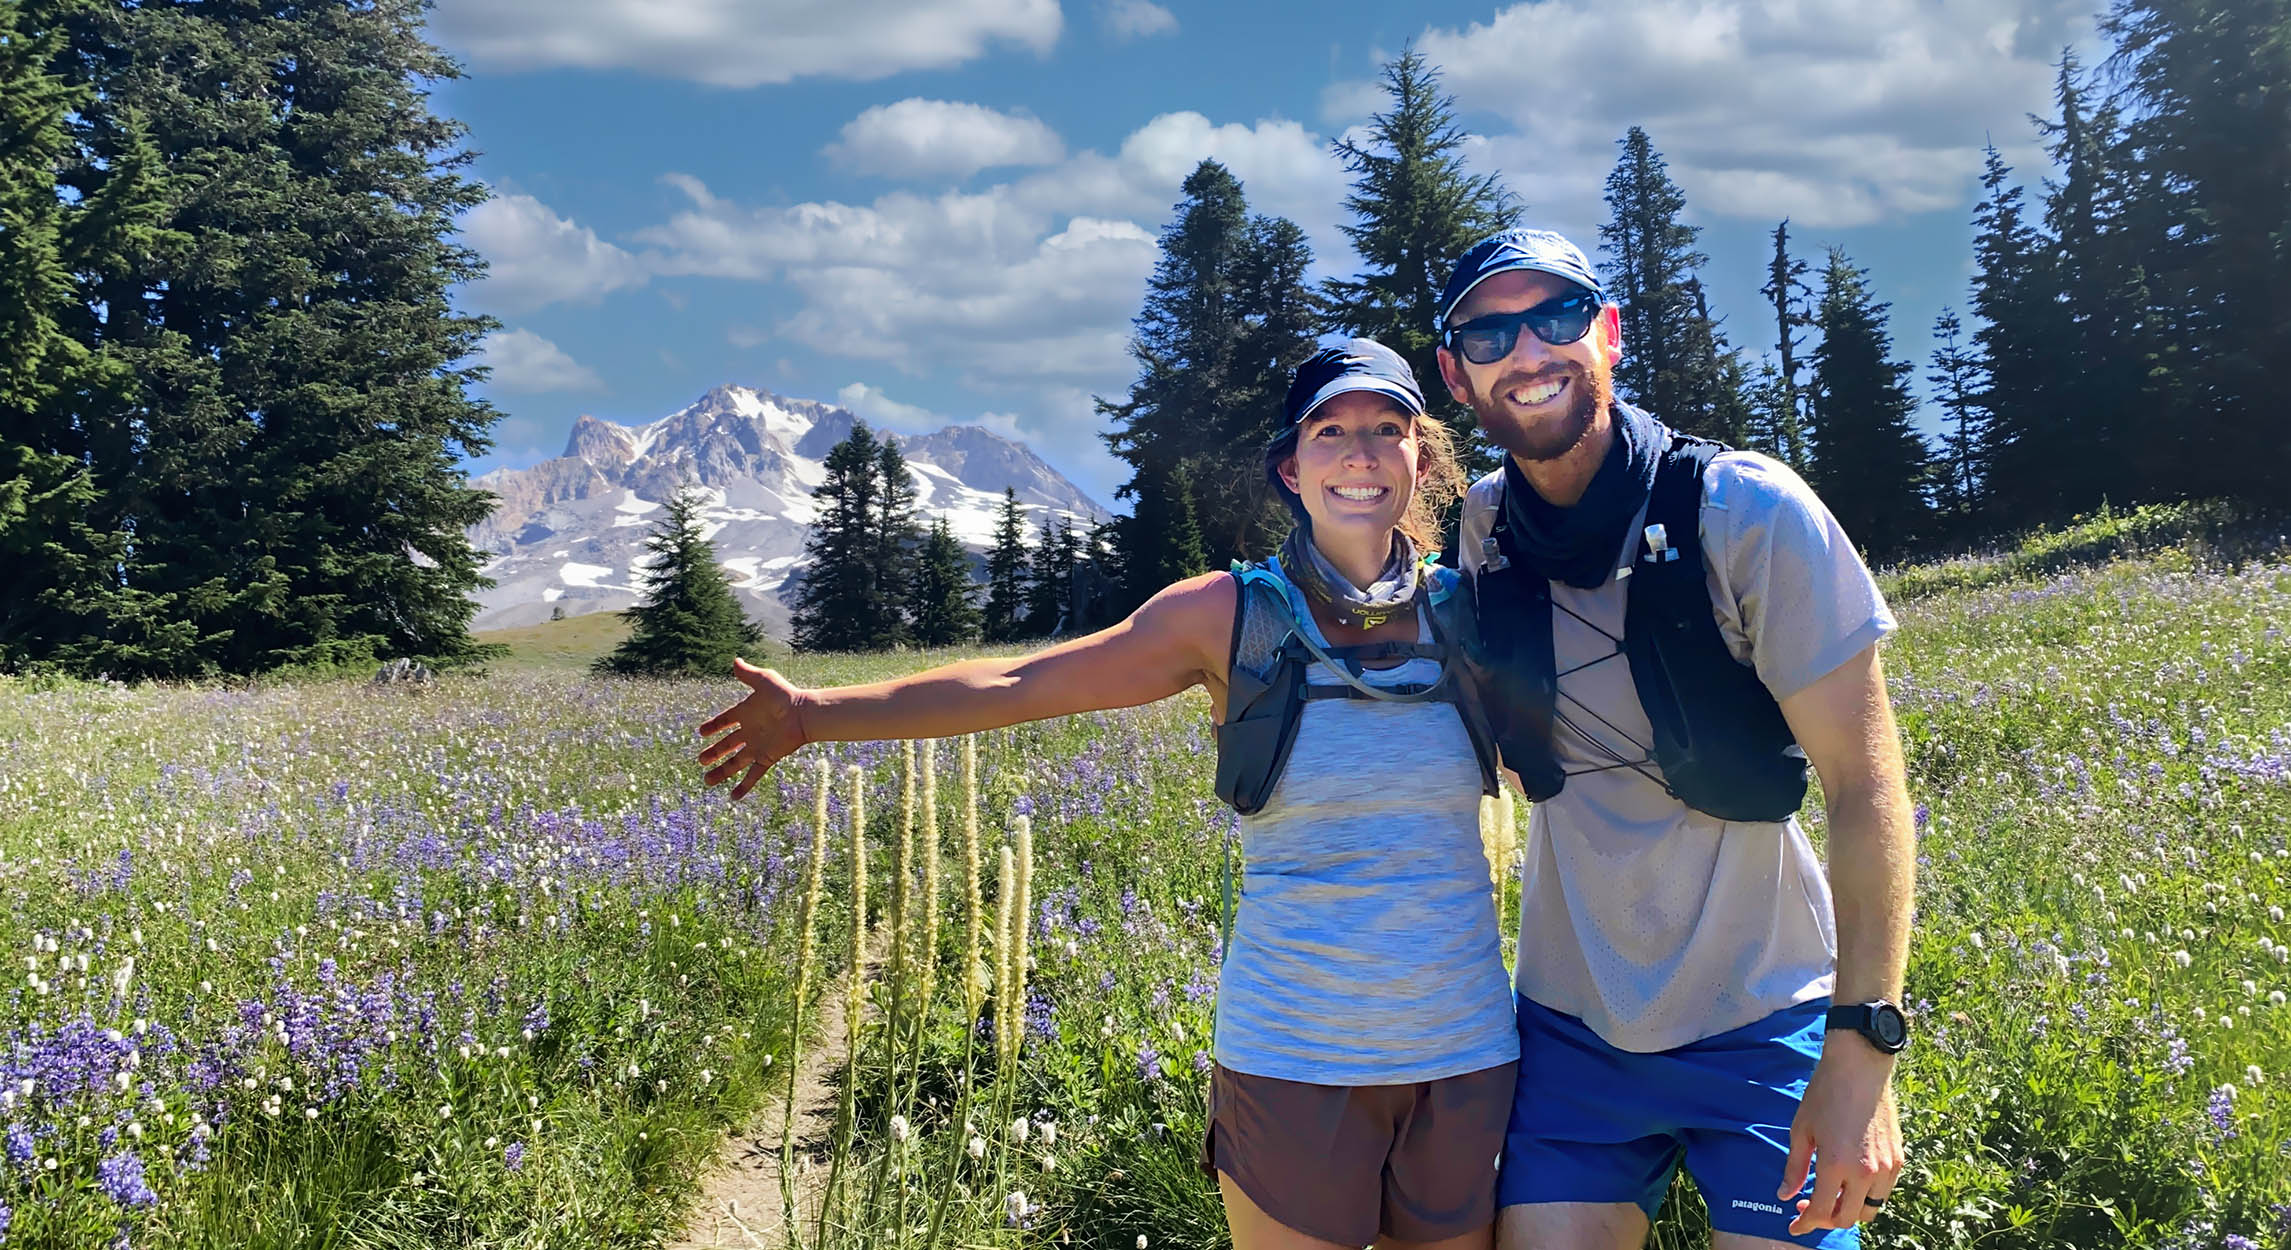 Paul and Daniel Wilson enjoy hiking in the Pacific Northwest.